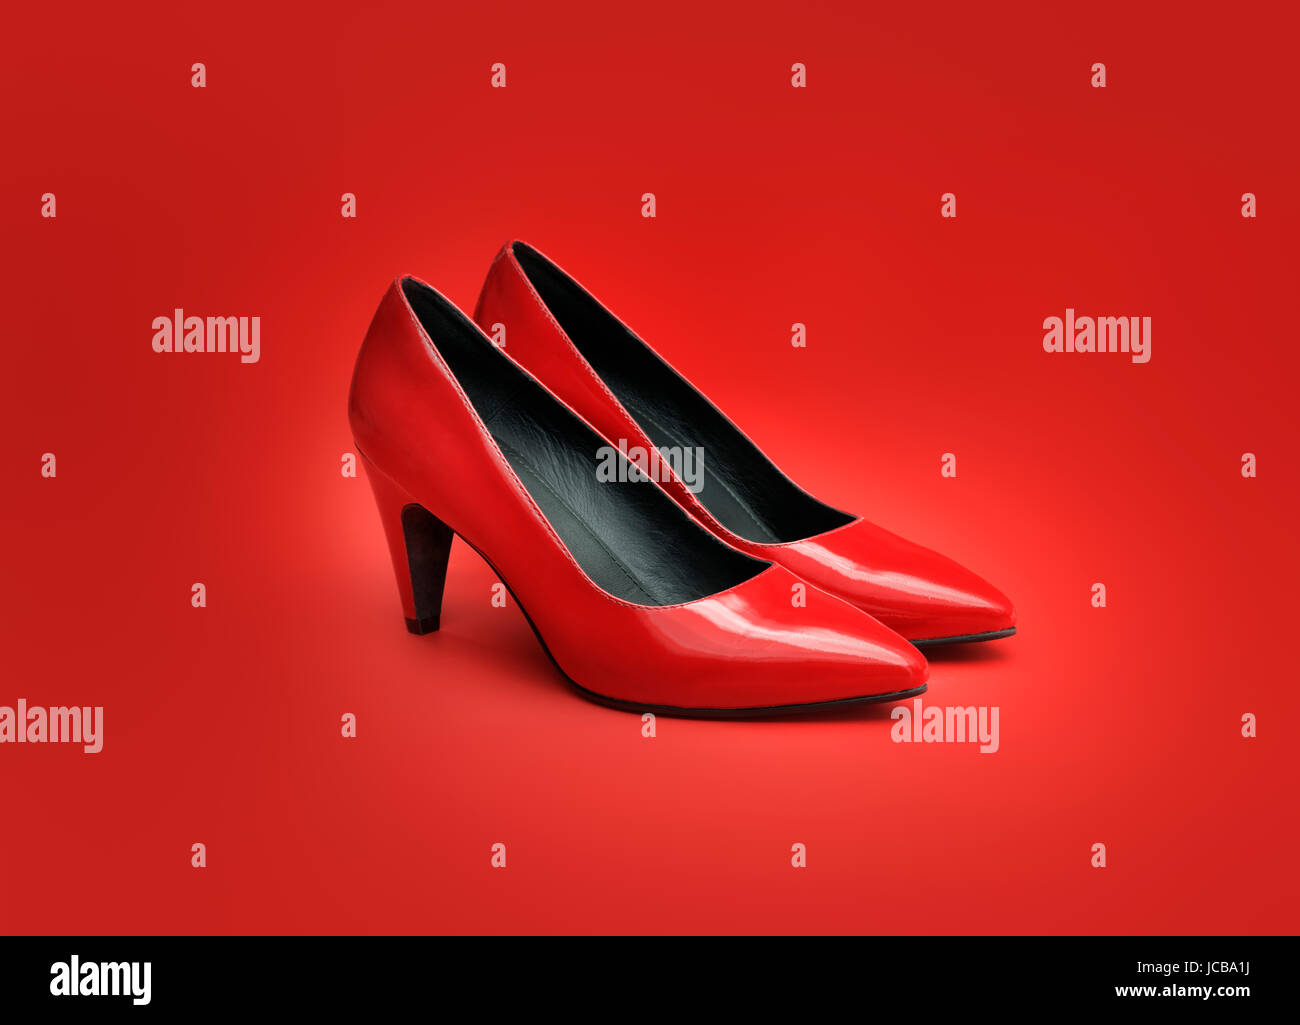 Pair of women's red pumps on red background. Stock Photo